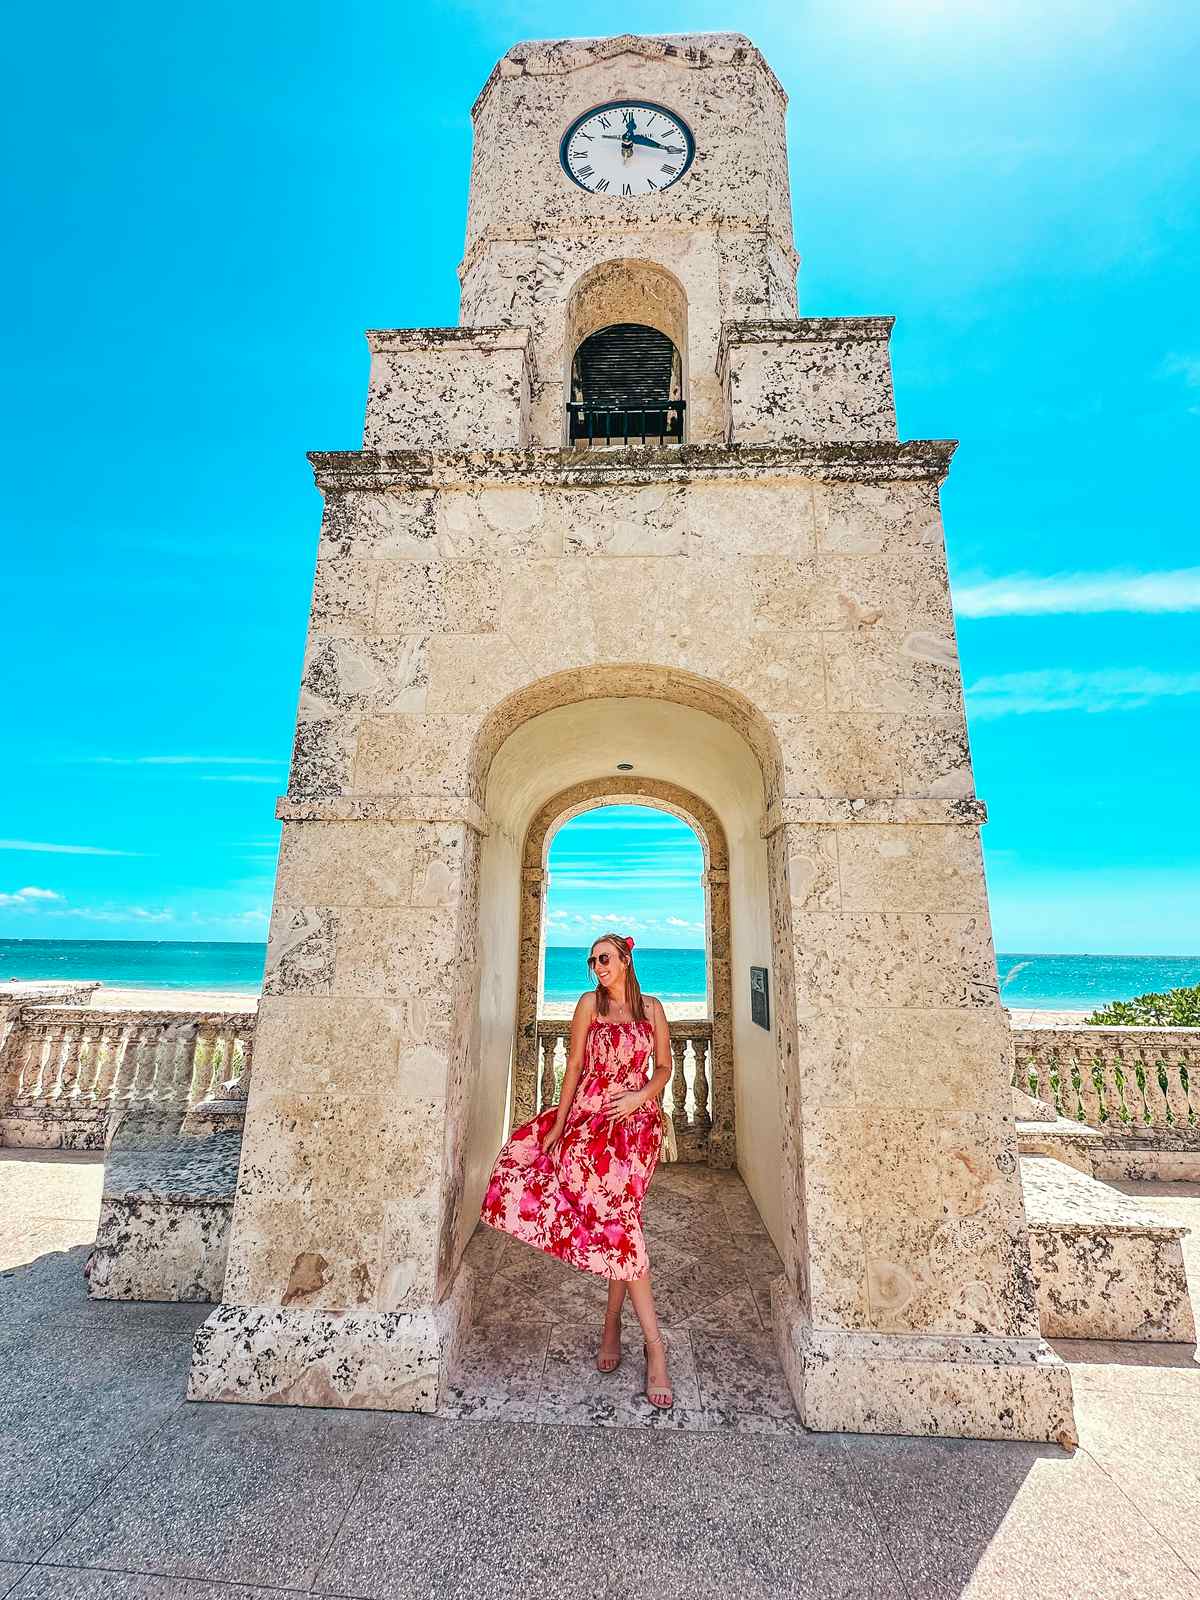 Posing at the clock tower in Palm Beach